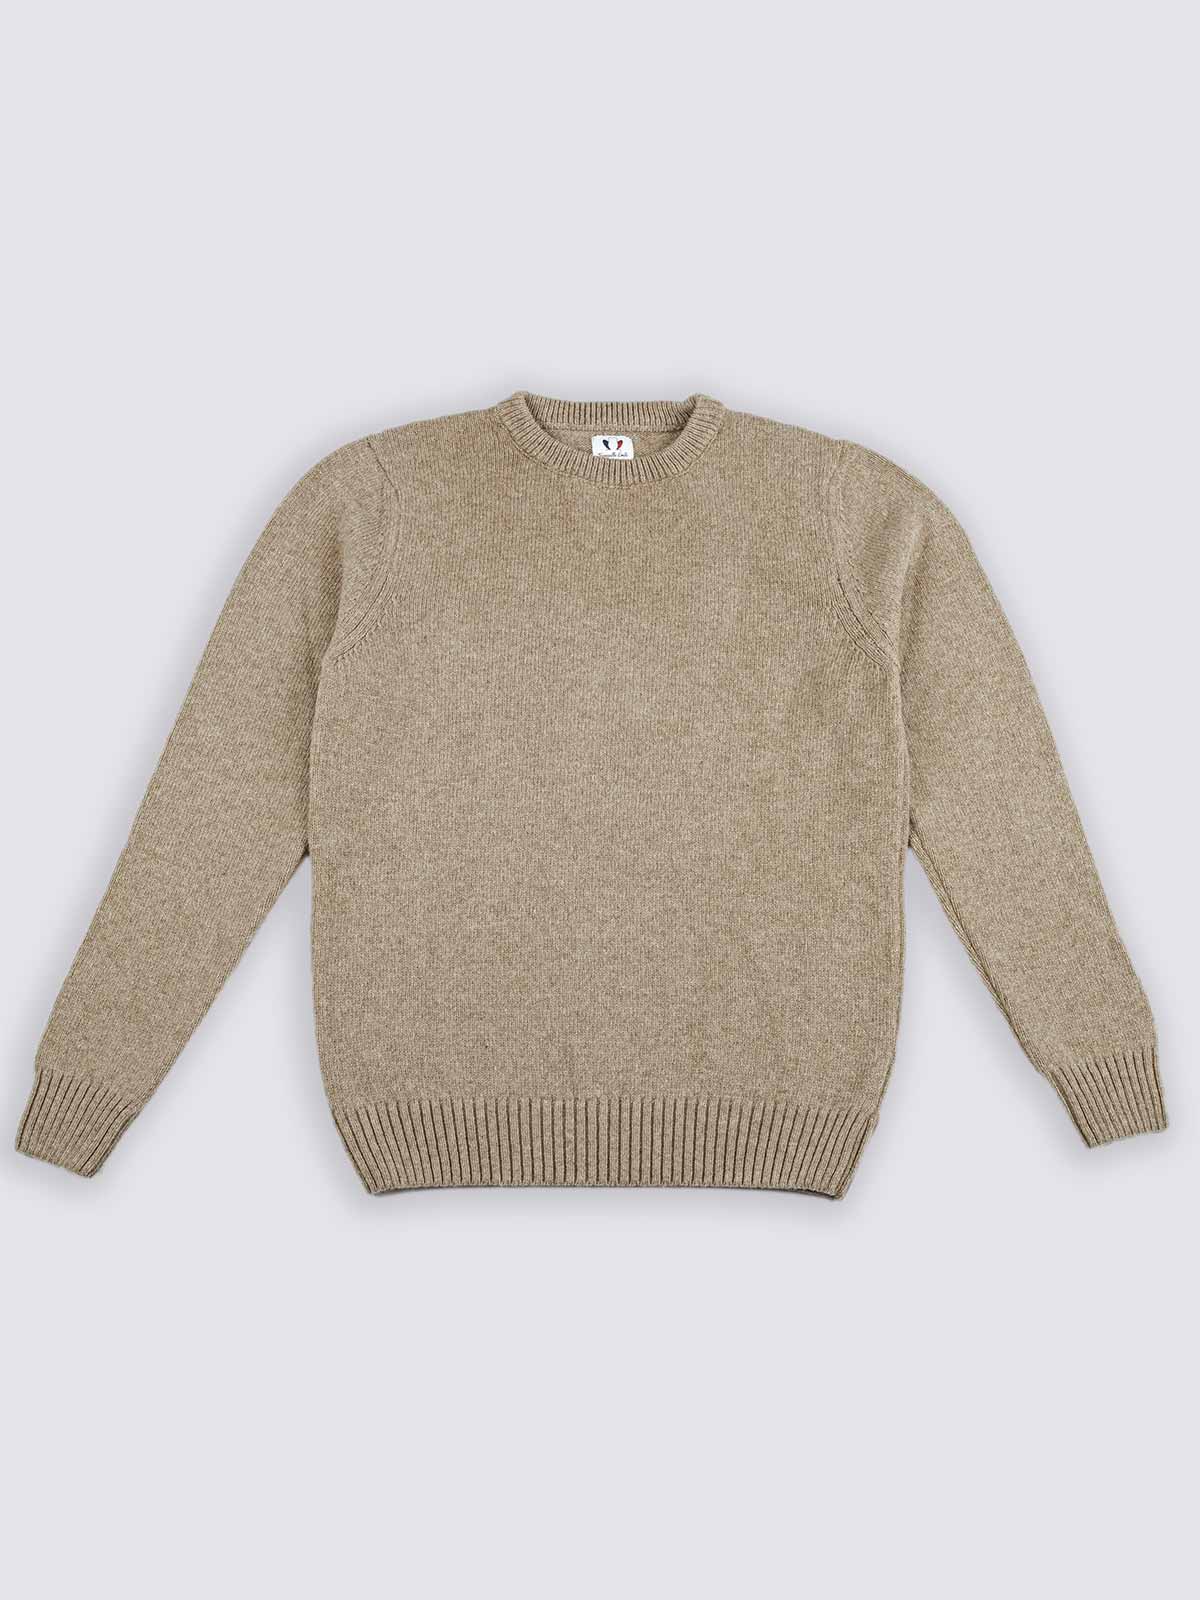 Pull femme made in France - Le Frileux taupe - Tranquille Emile